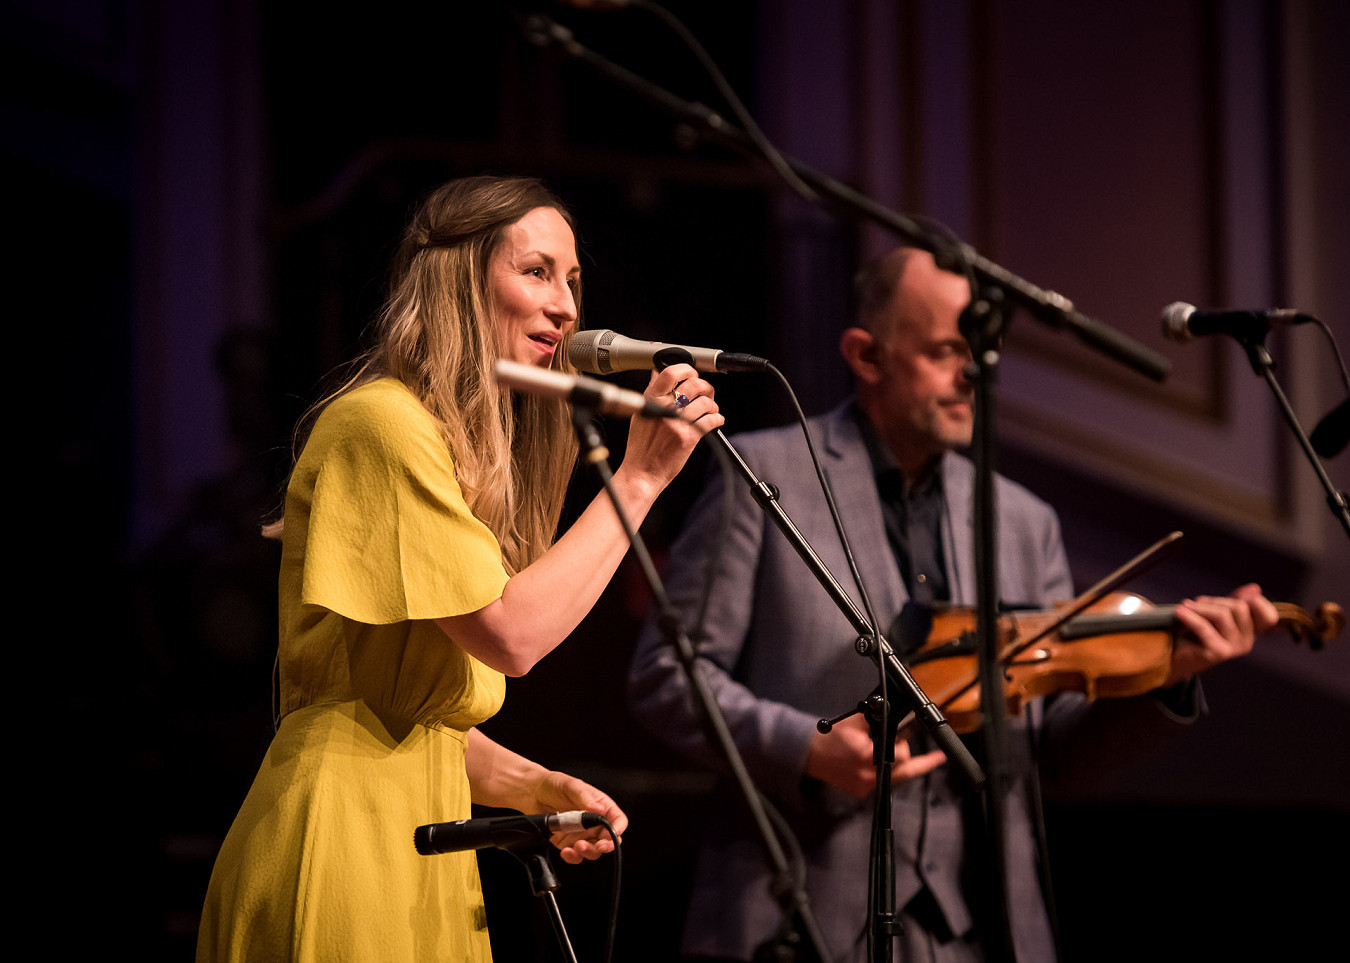 Singer, Julie Fowlis, performing on stage at the opening event of an Edinburgh business conference.